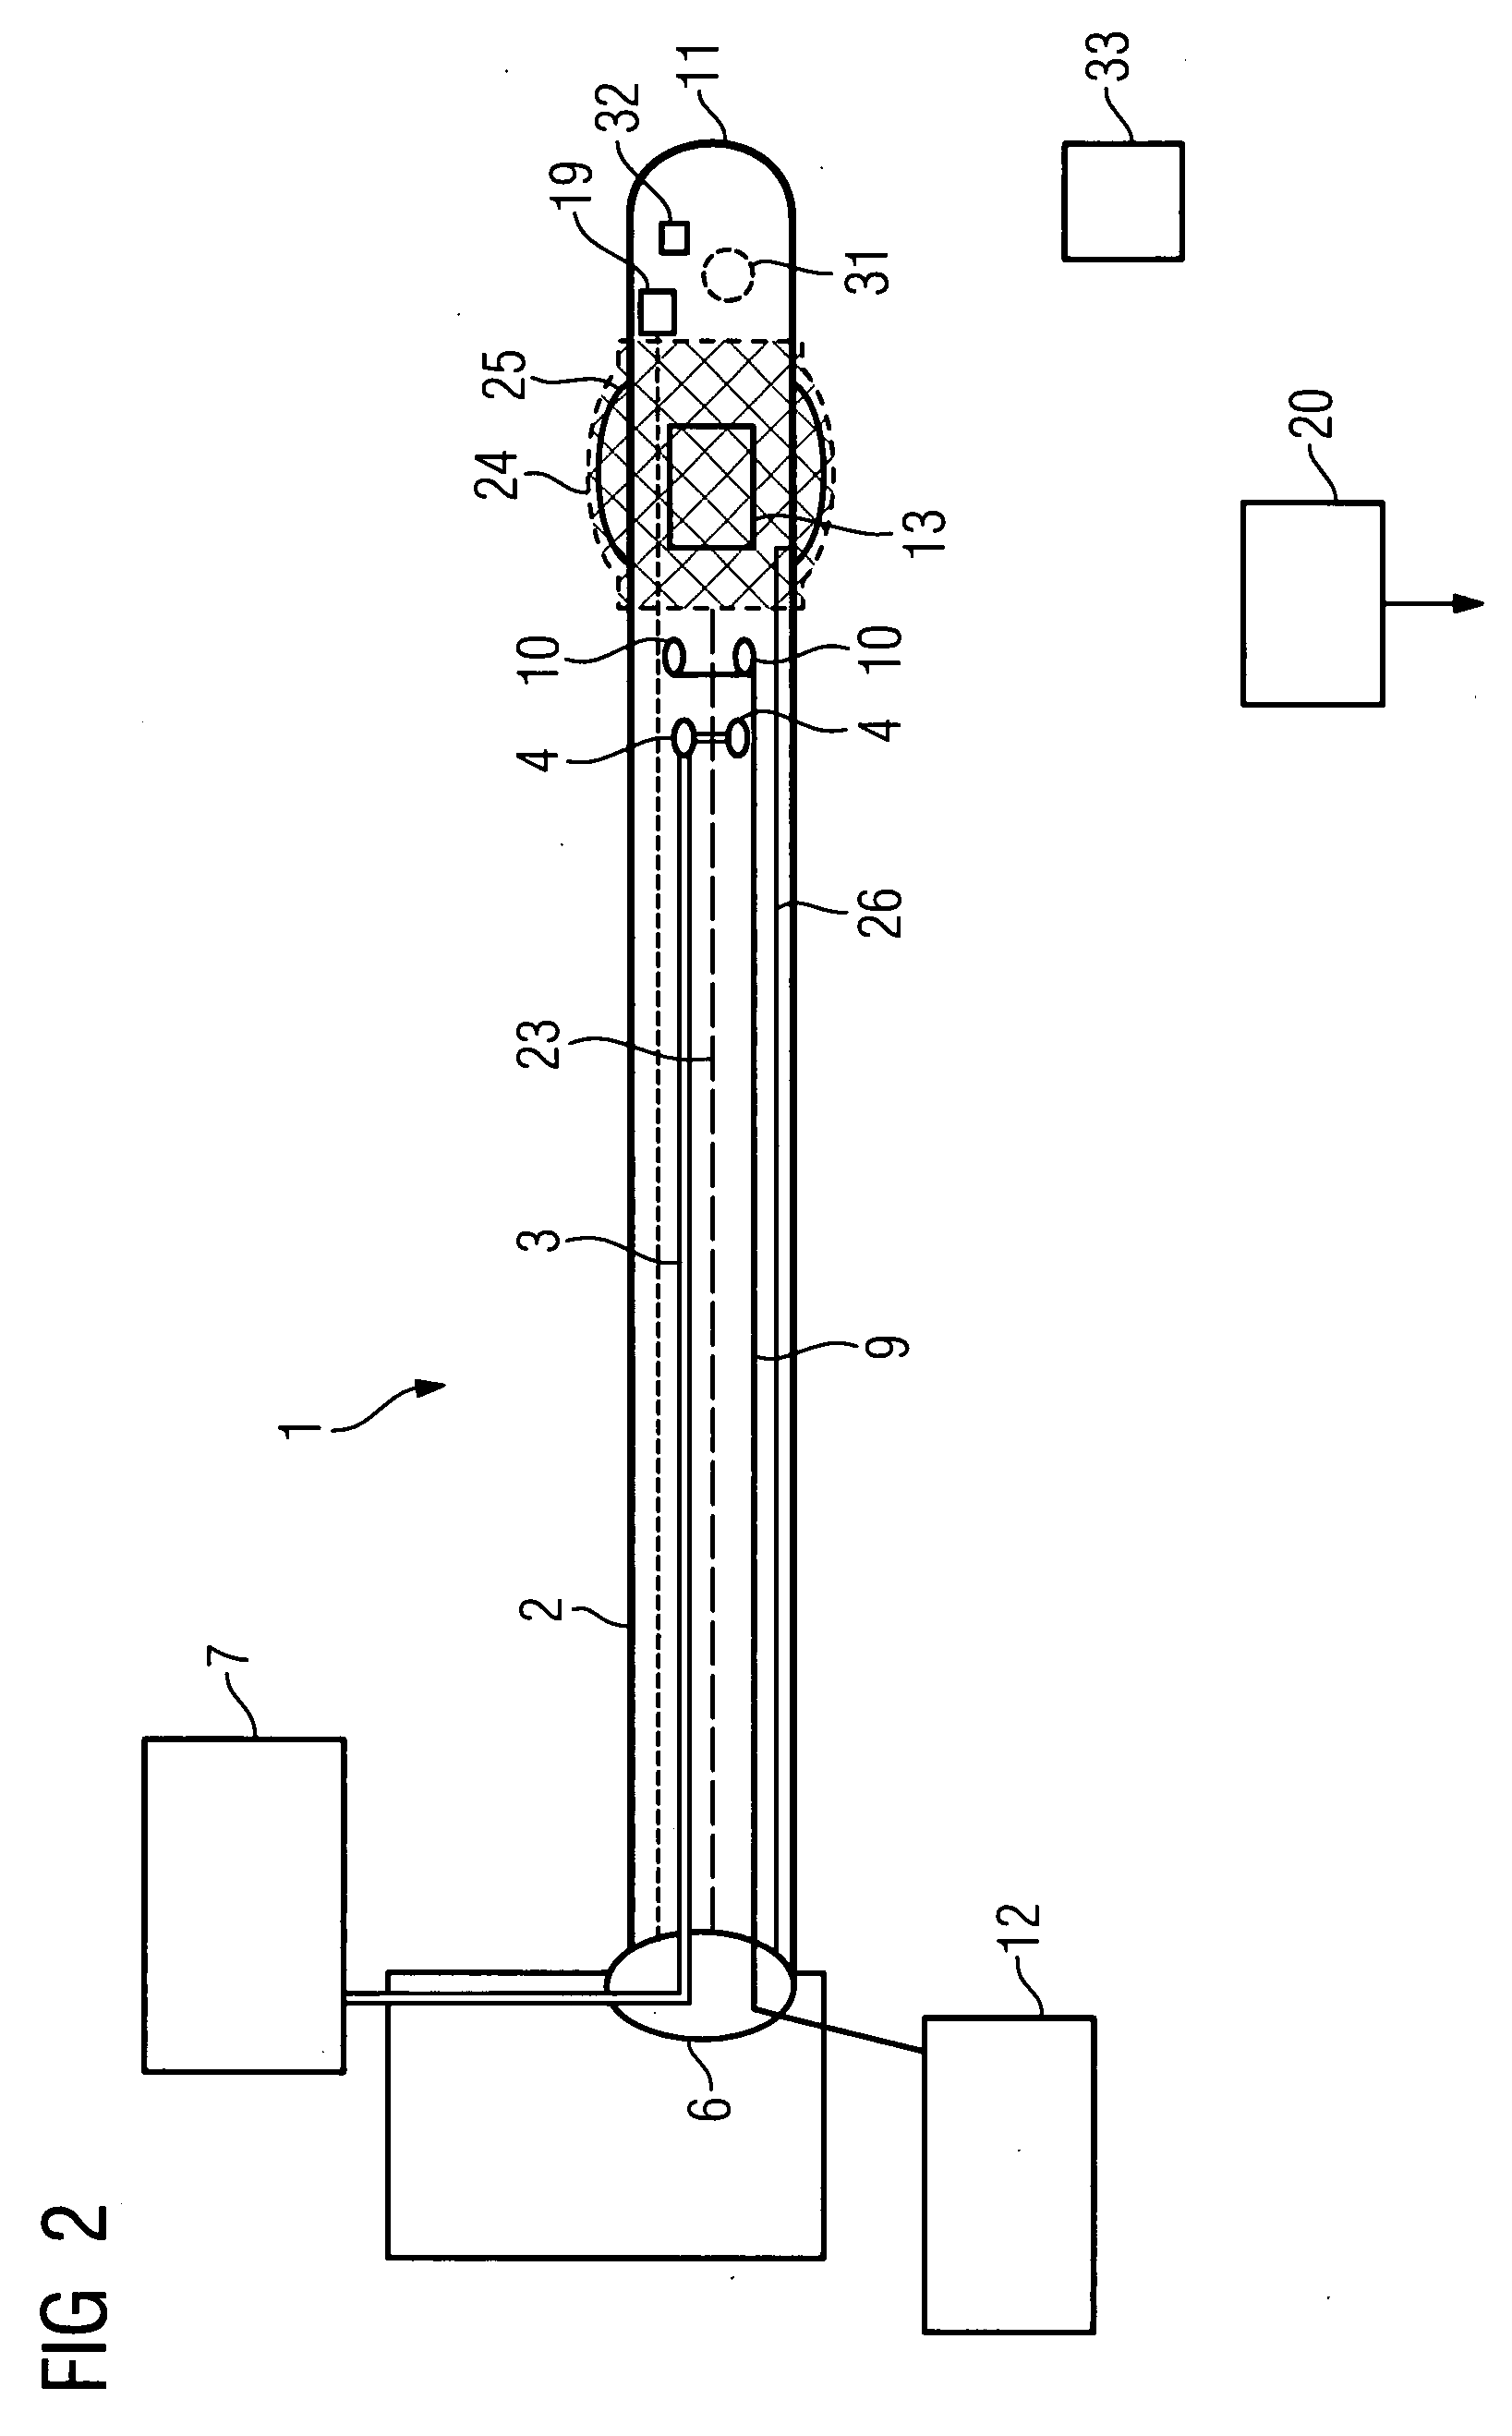 Catheter for removing tissue from a hollow organ